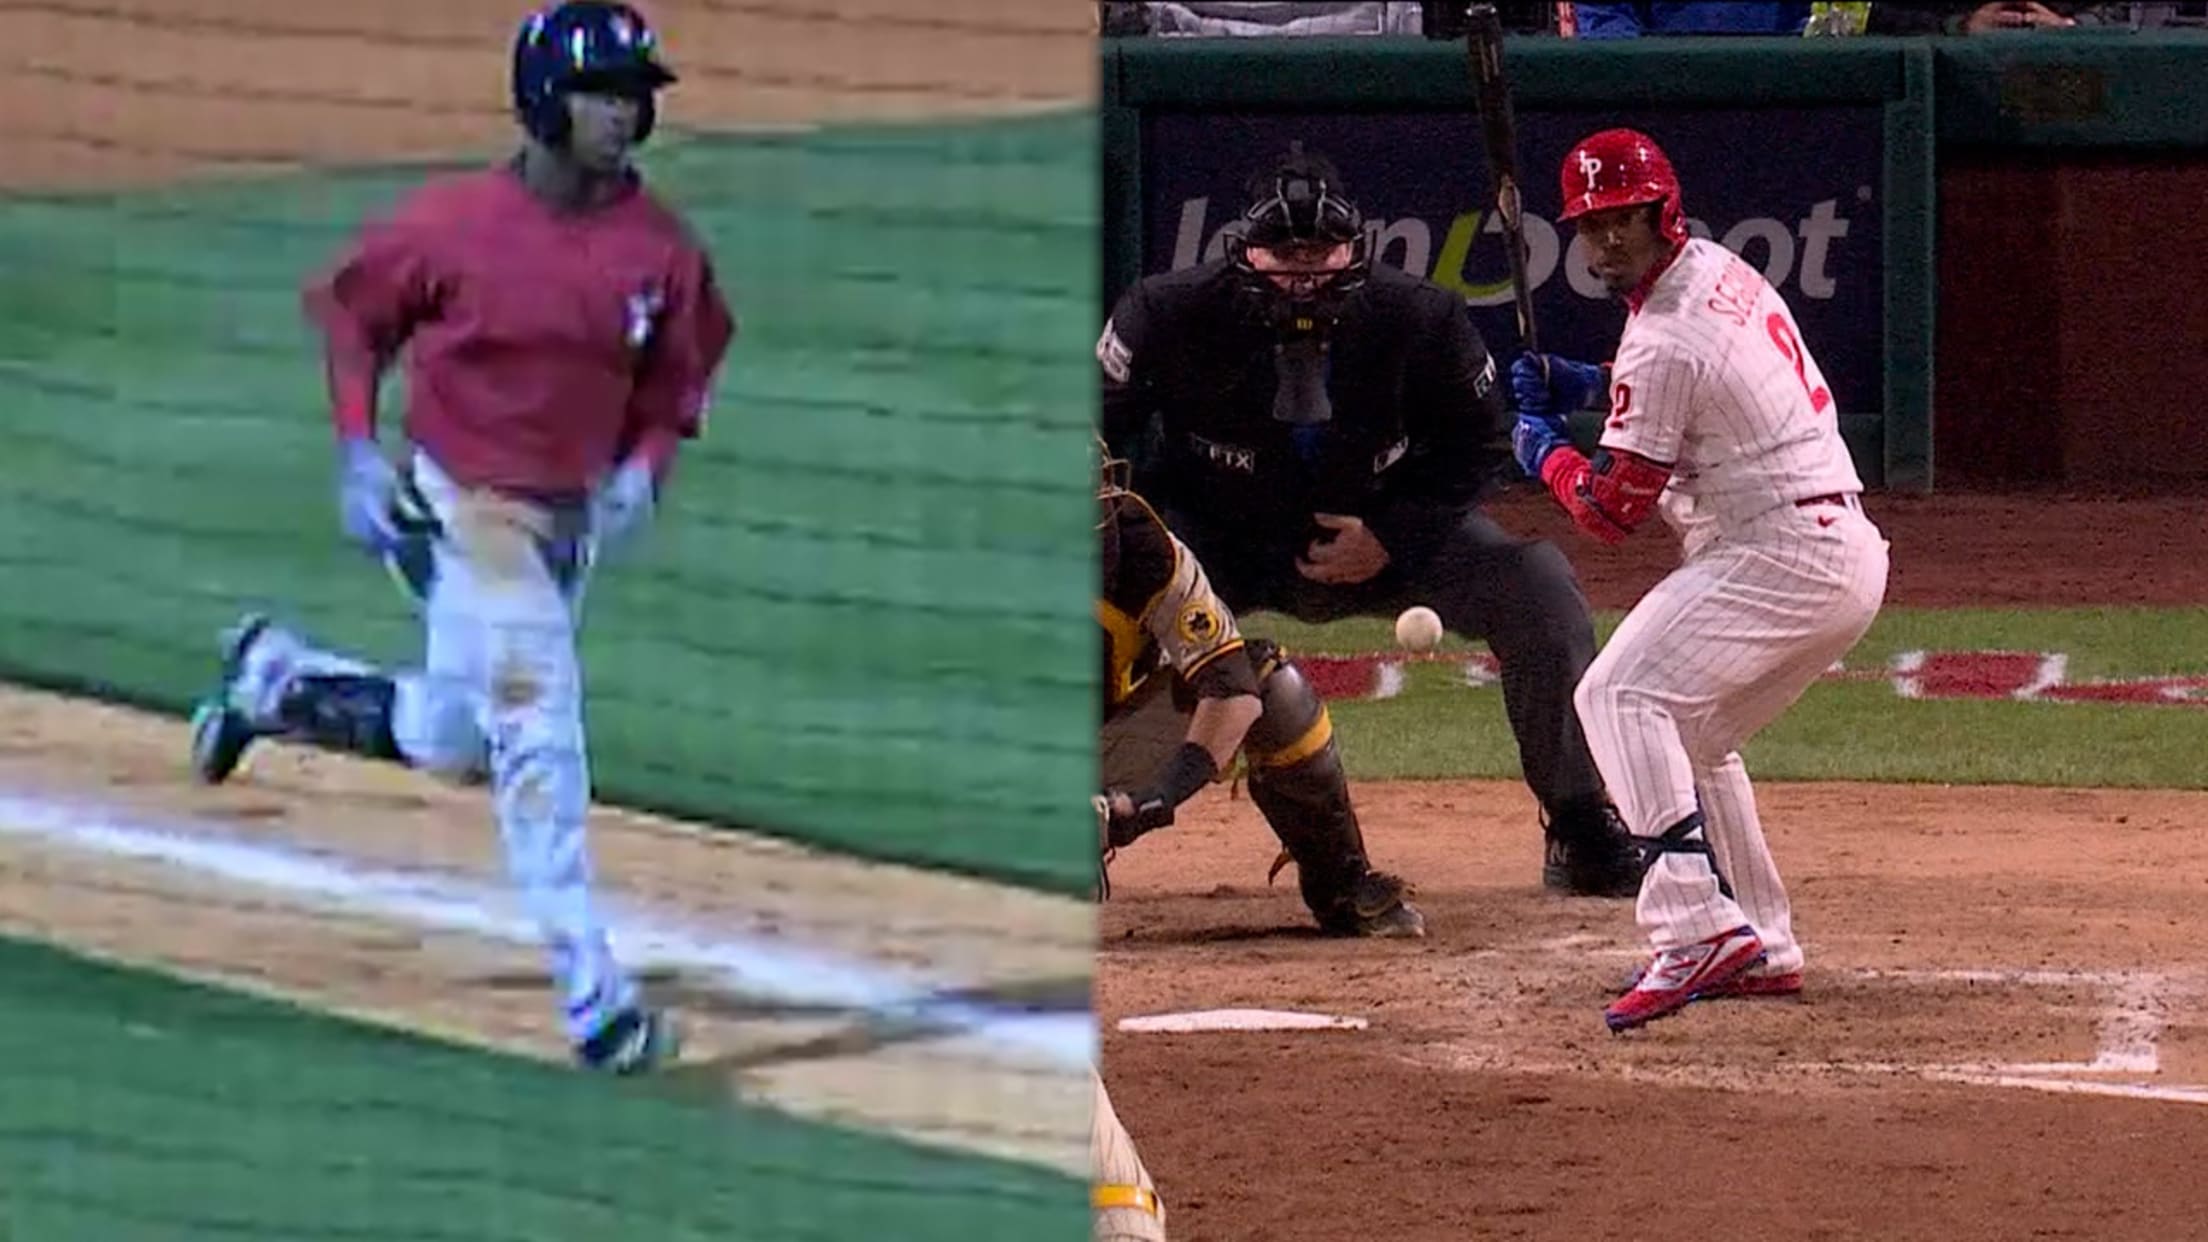 Jean Segura then and now